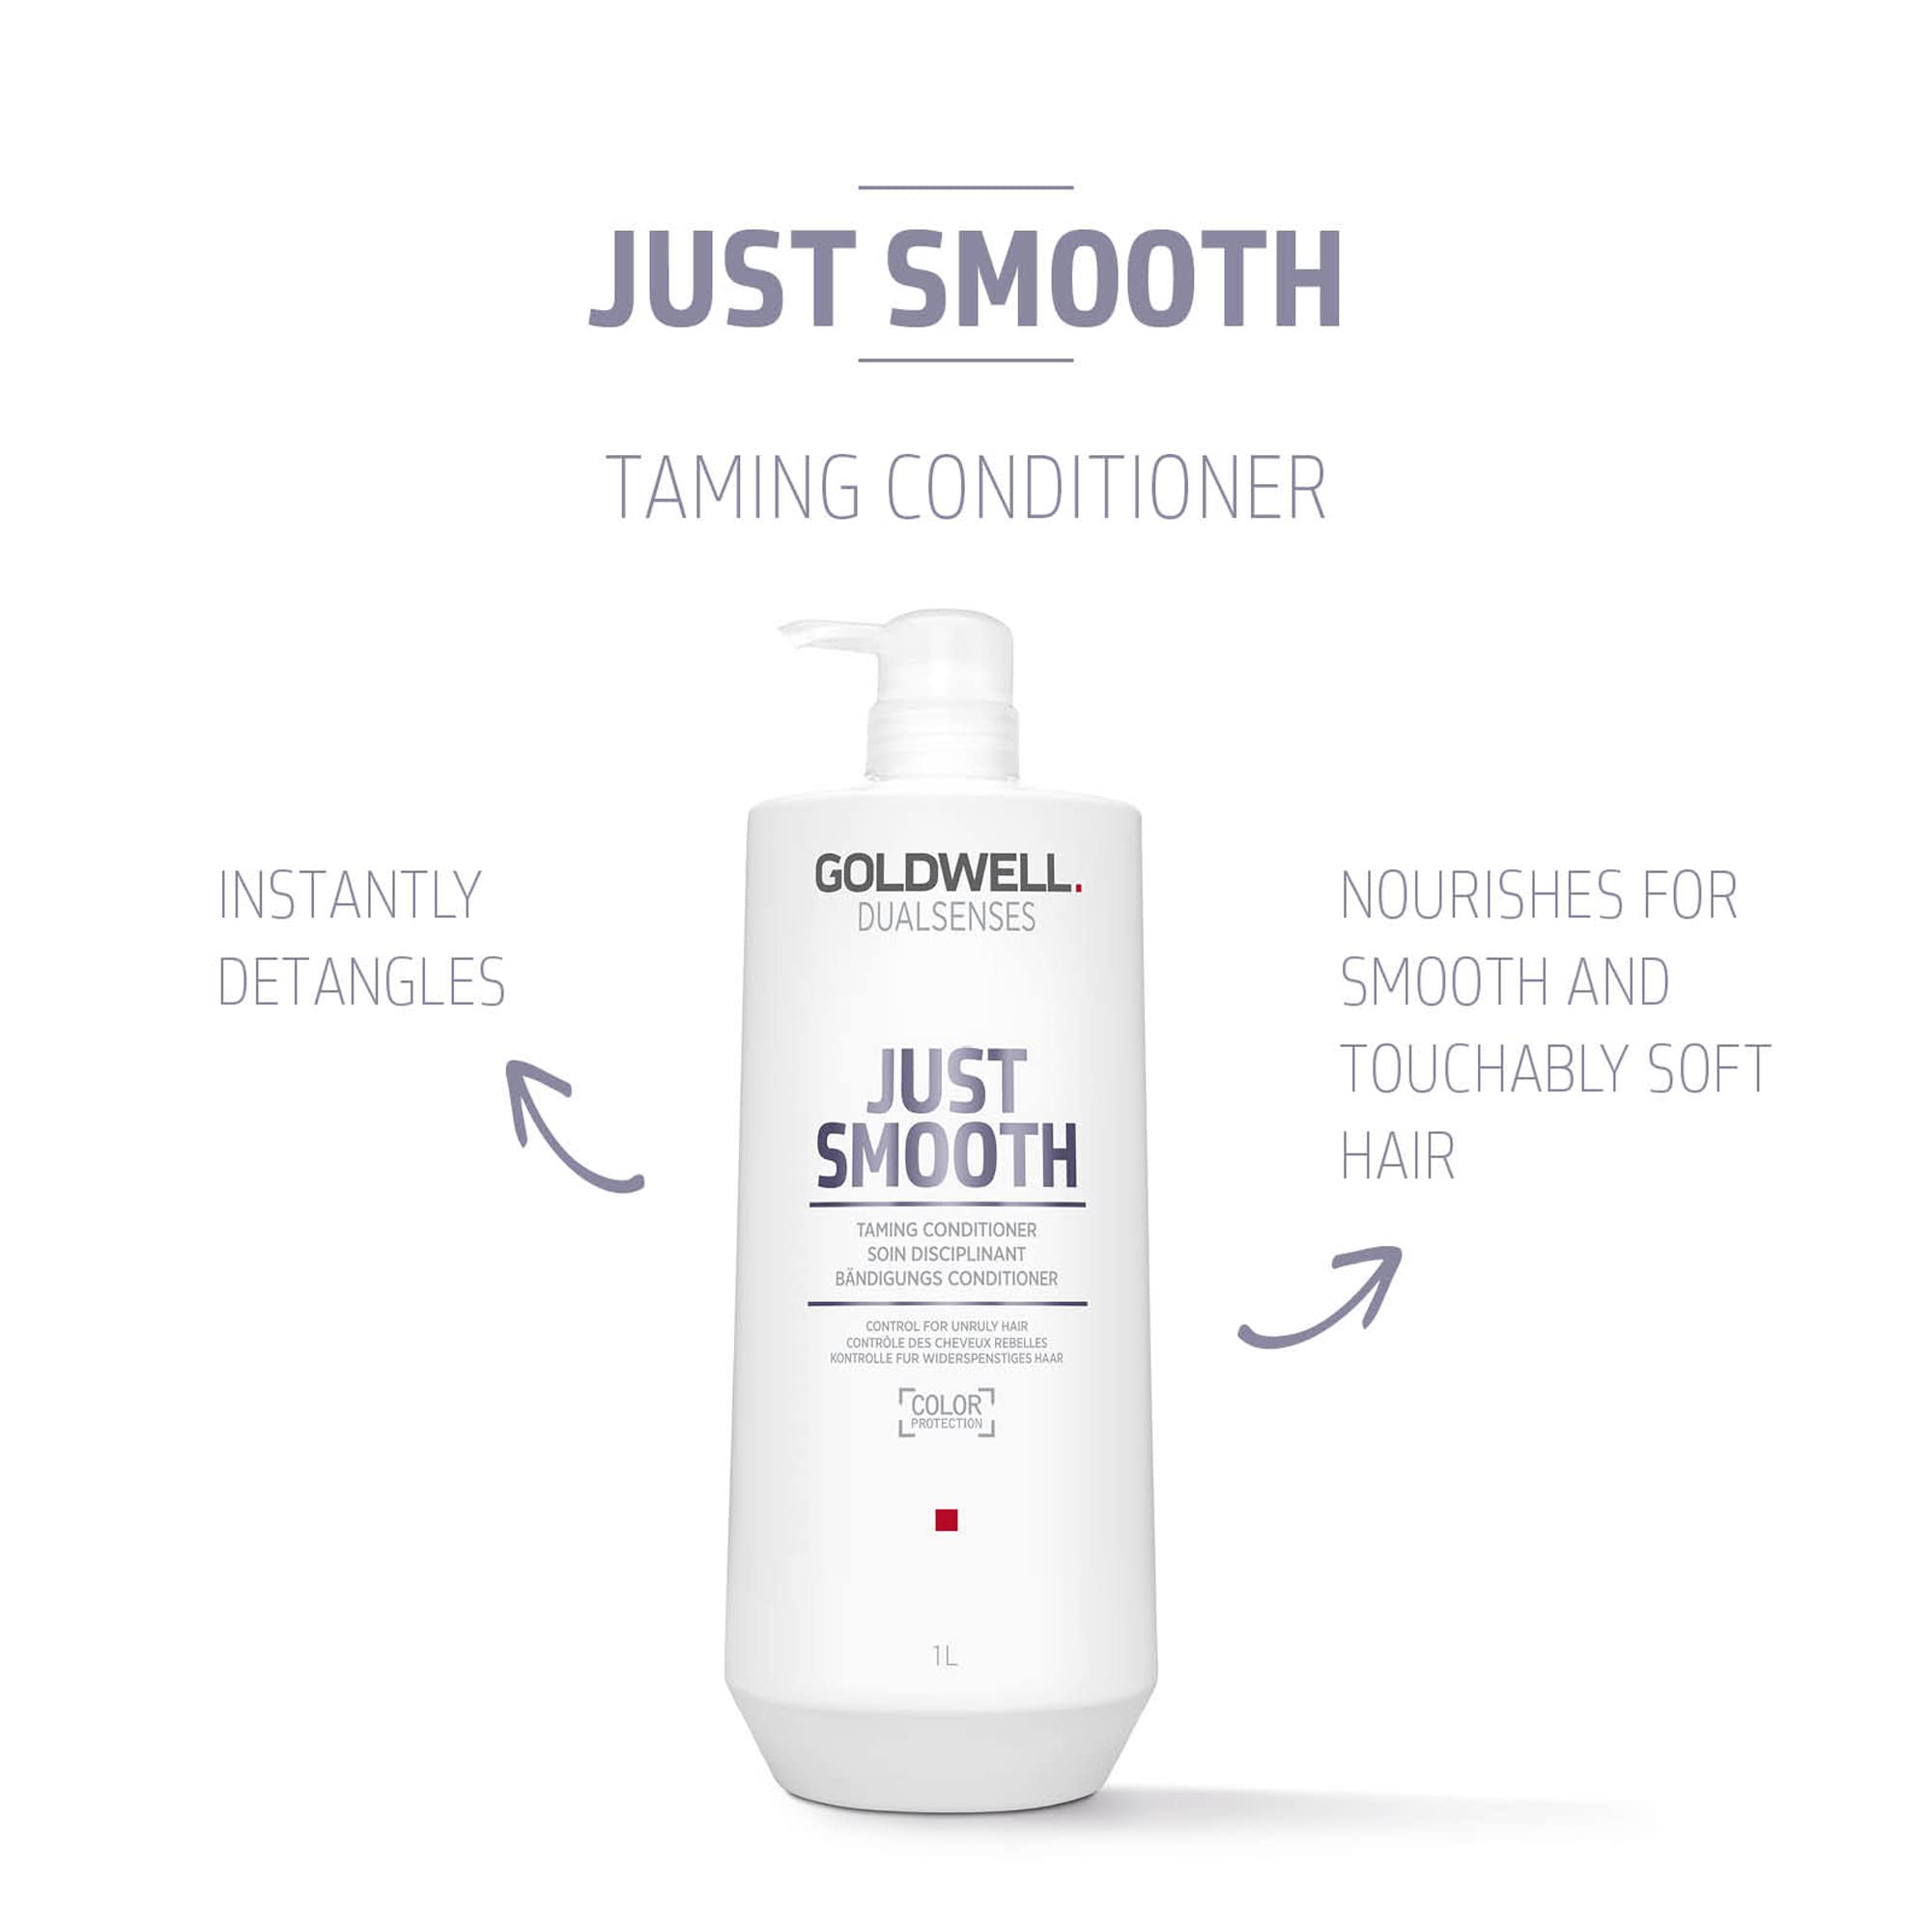 Goldwell Dualsenses Just Smooth Taming Anti-Frizz & Humidity Control Conditioner